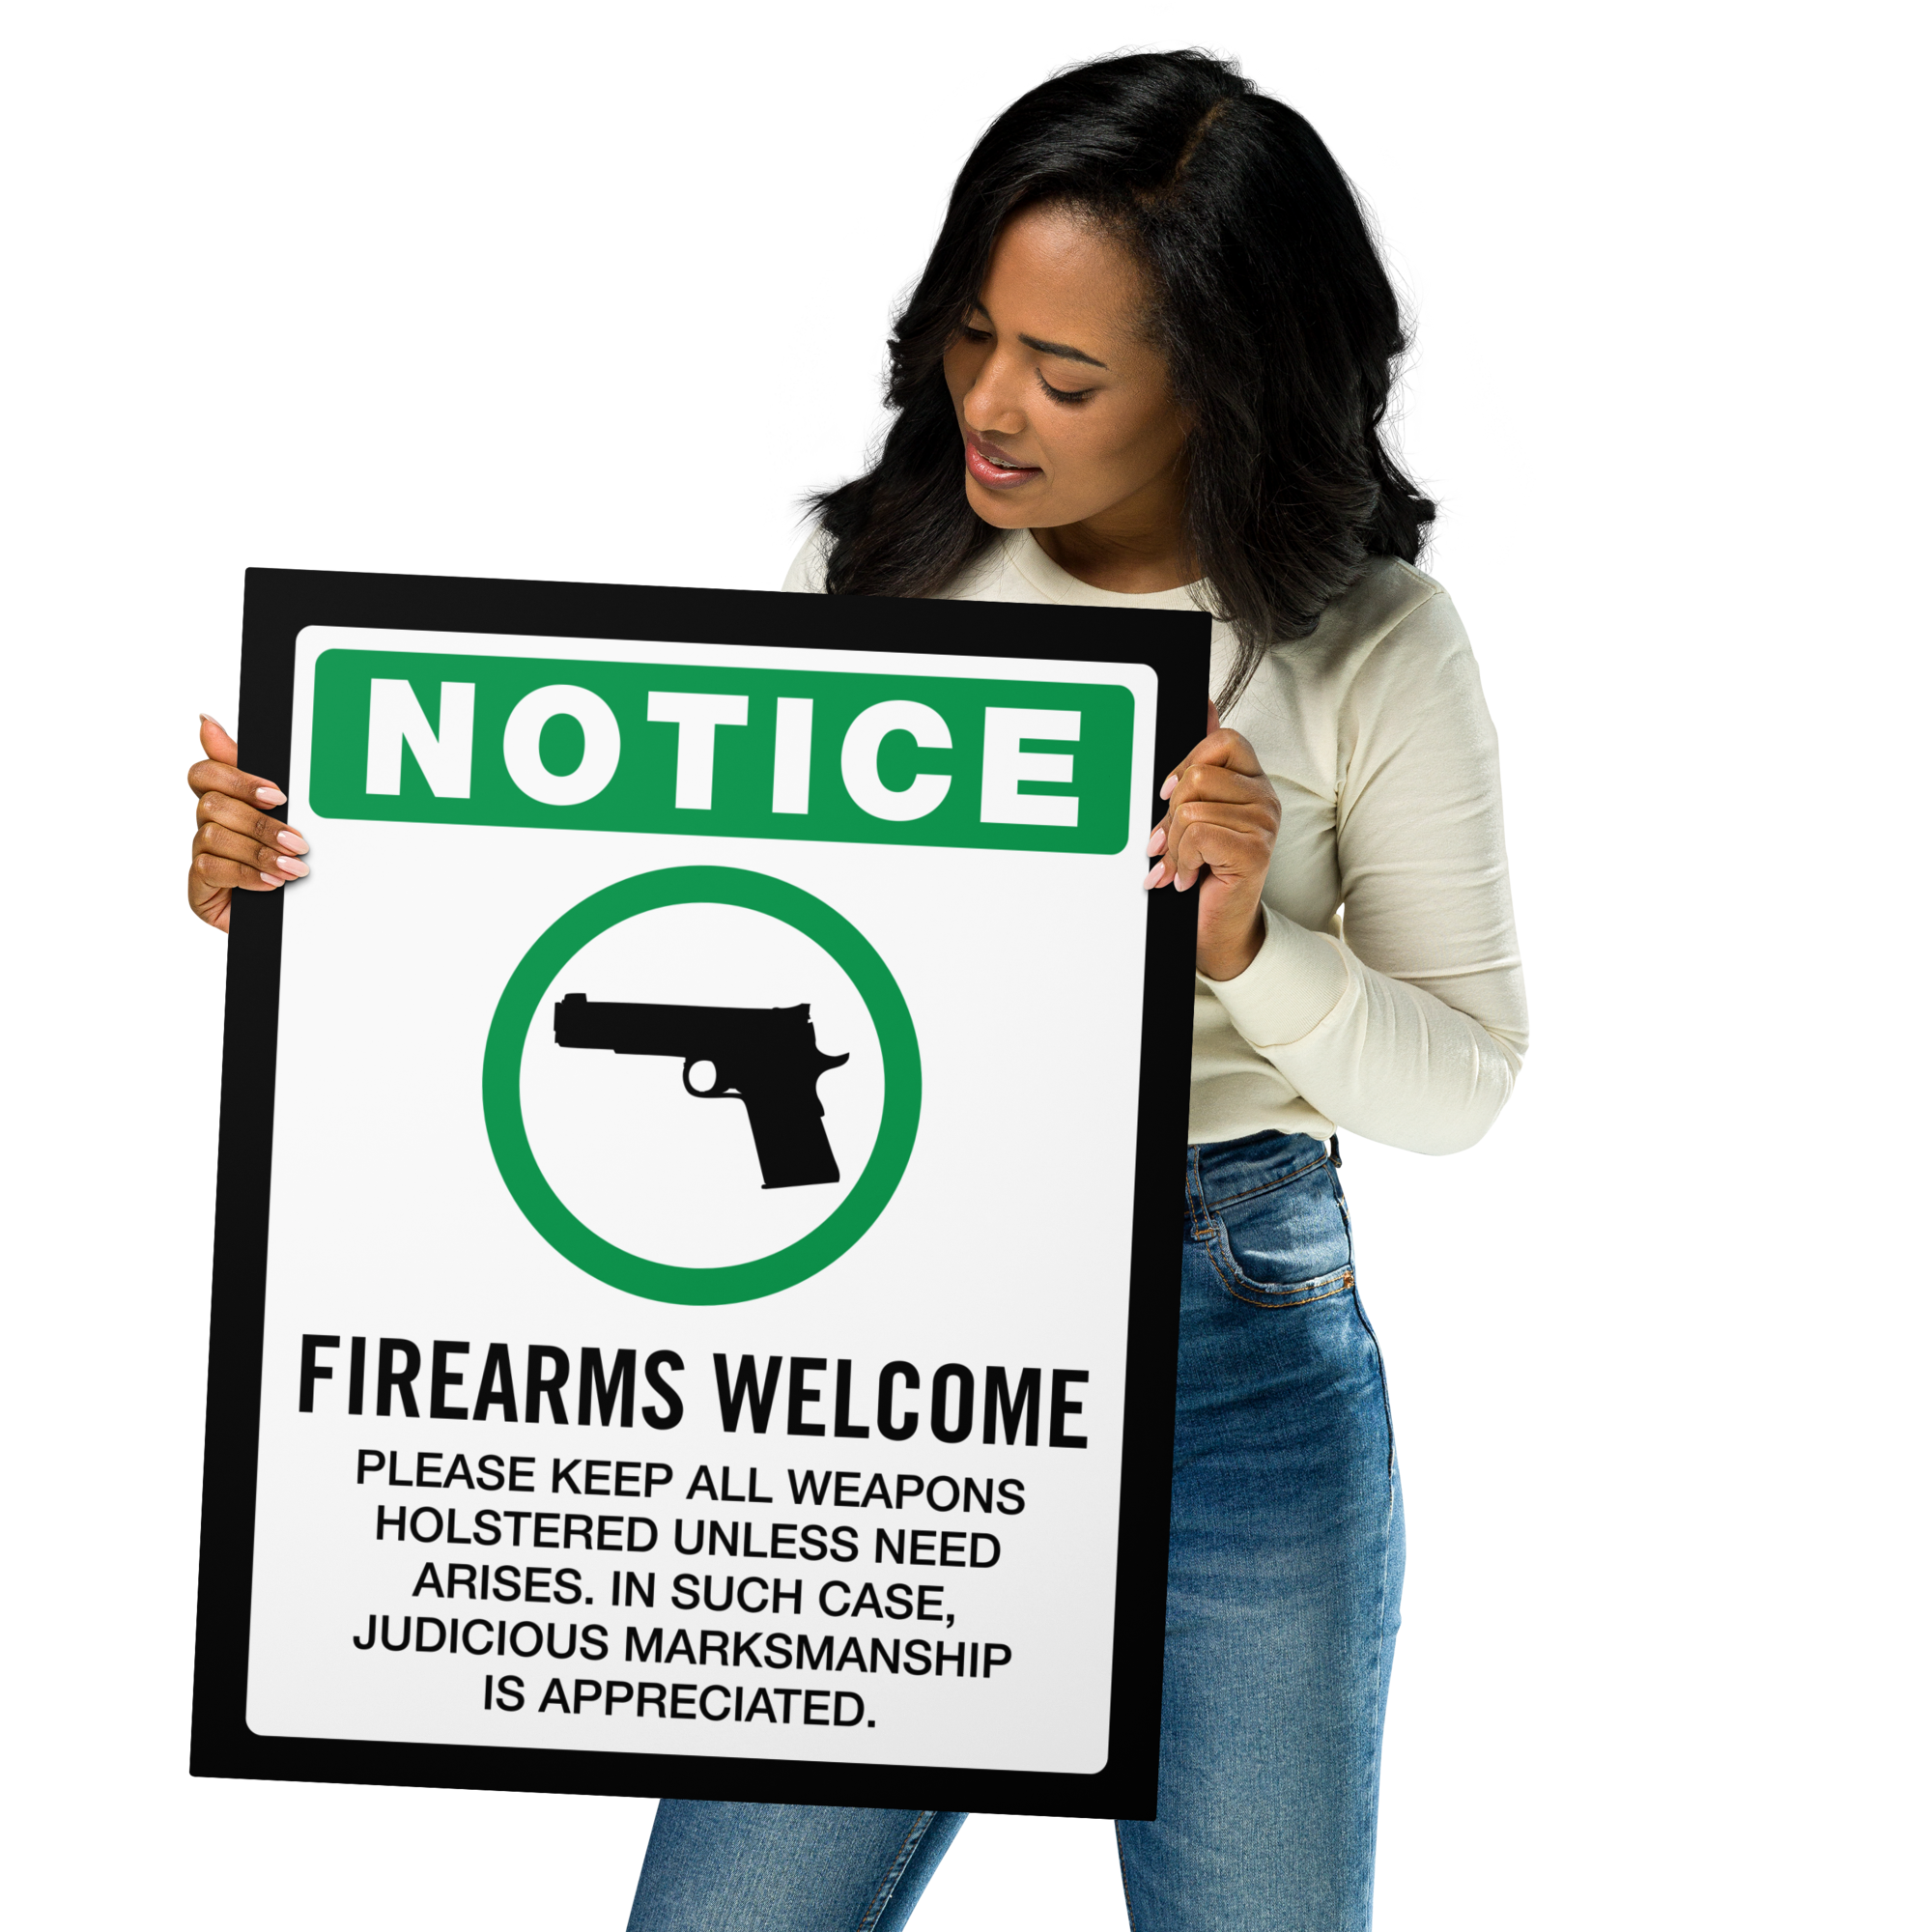 Firearms Welcome Metal Made in the USA Sign